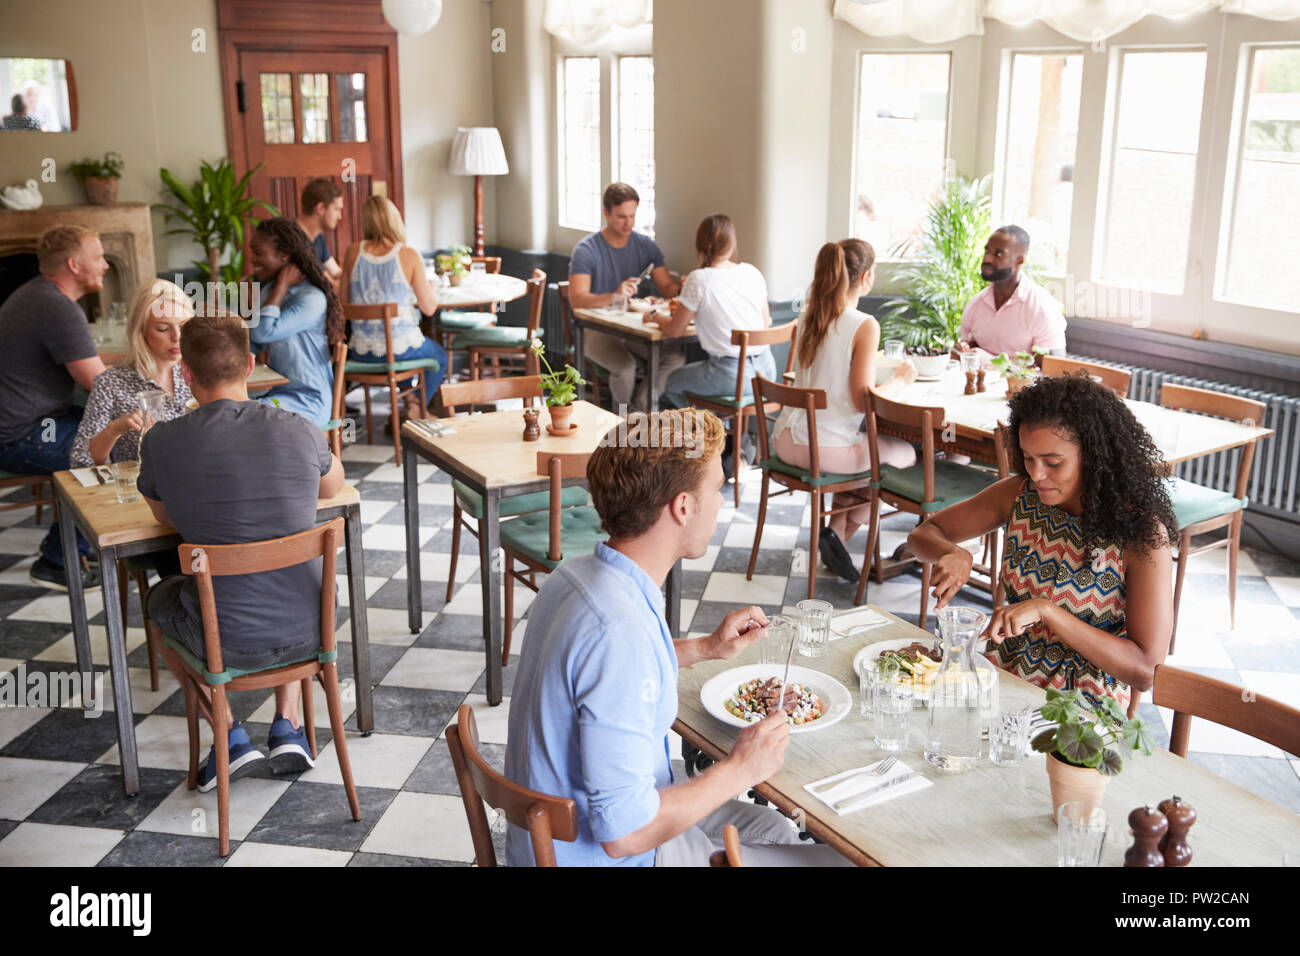 Customers Enjoying Meals In Busy Restaurant Stock Photo